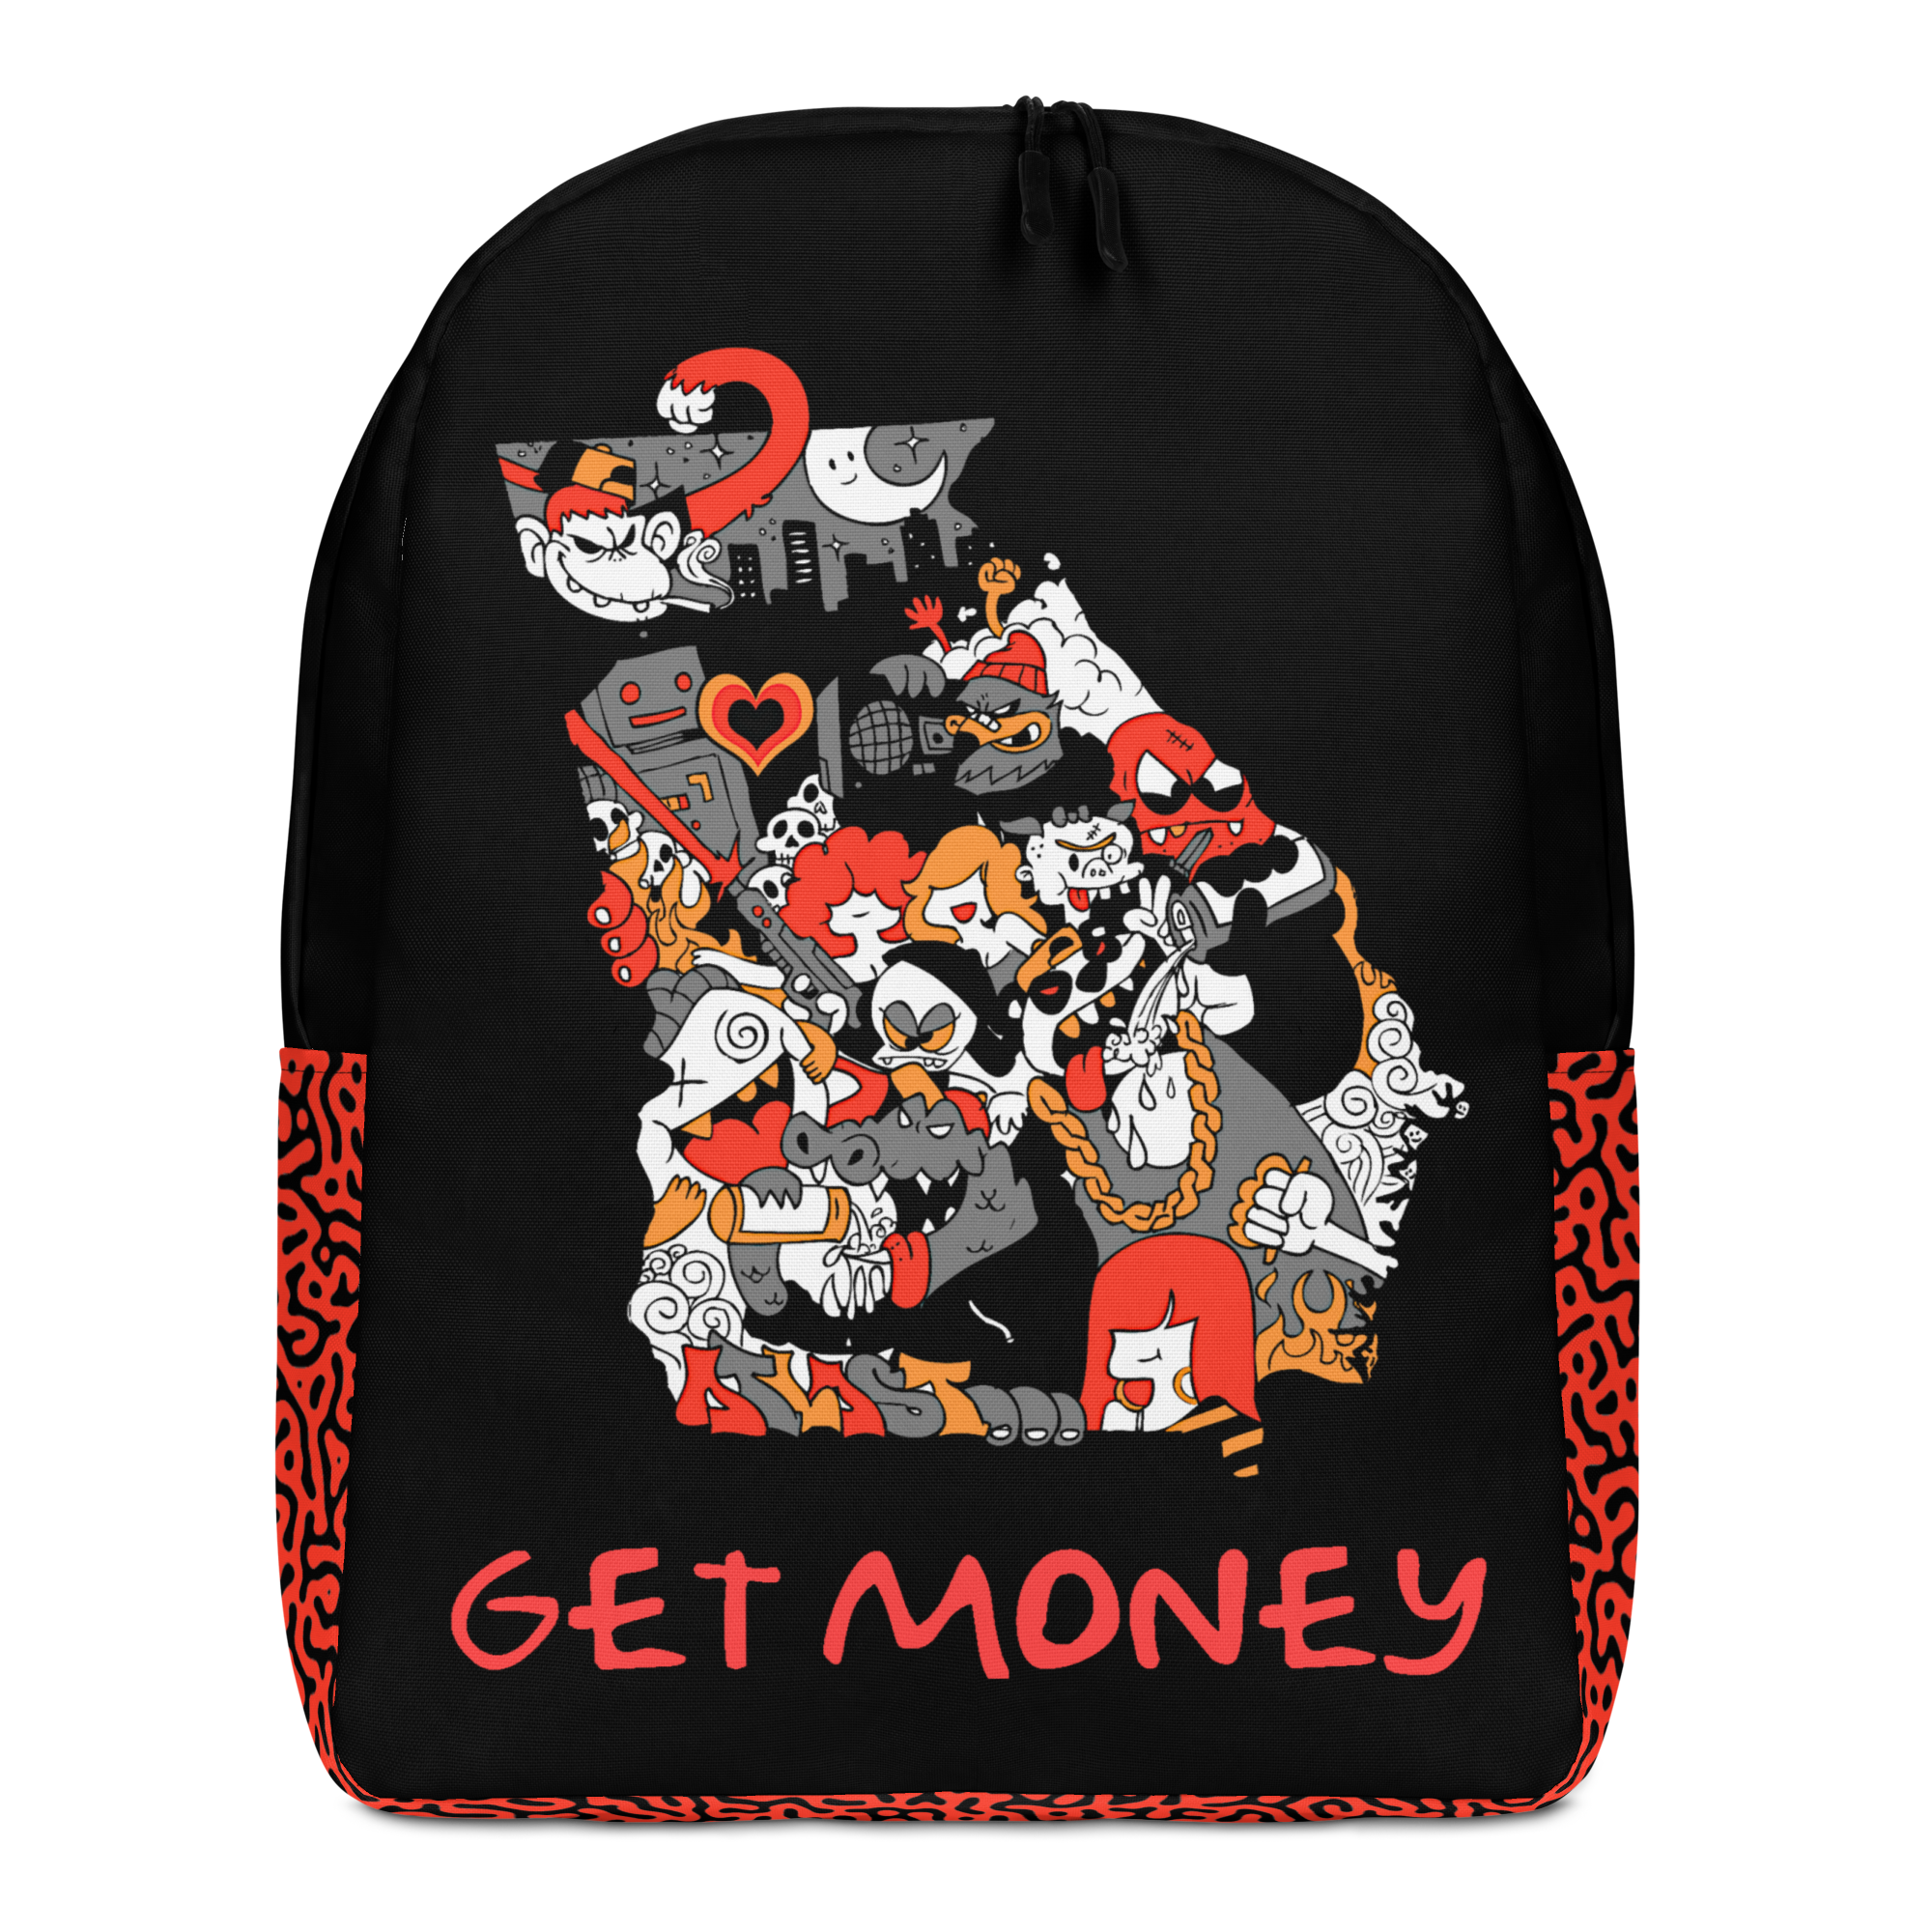 GA "Get Money" Menagerie Pouch Backpack